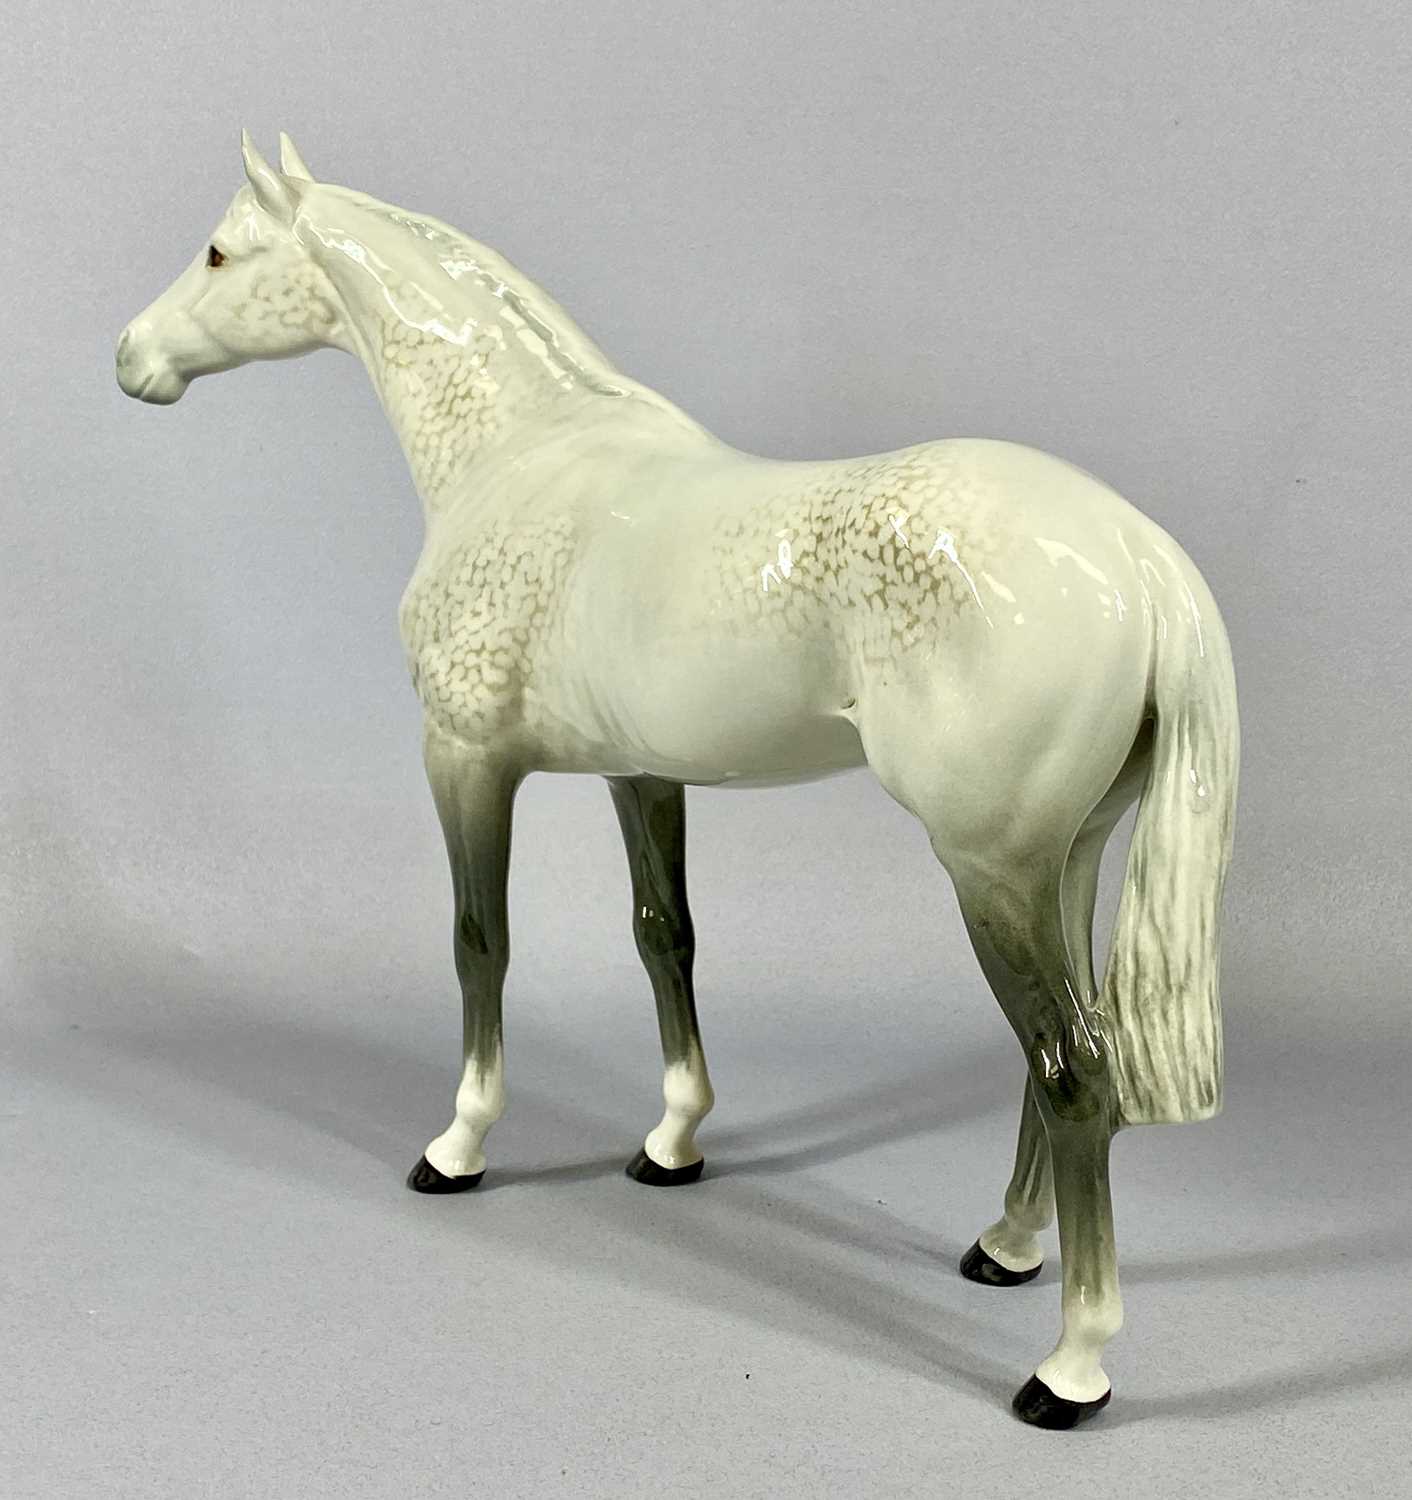 BESWICK AND ROYAL DOULTON ANIMAL FIGURINES, comprising, large Beswick dappled grey horse, 28 (h) x - Image 4 of 5